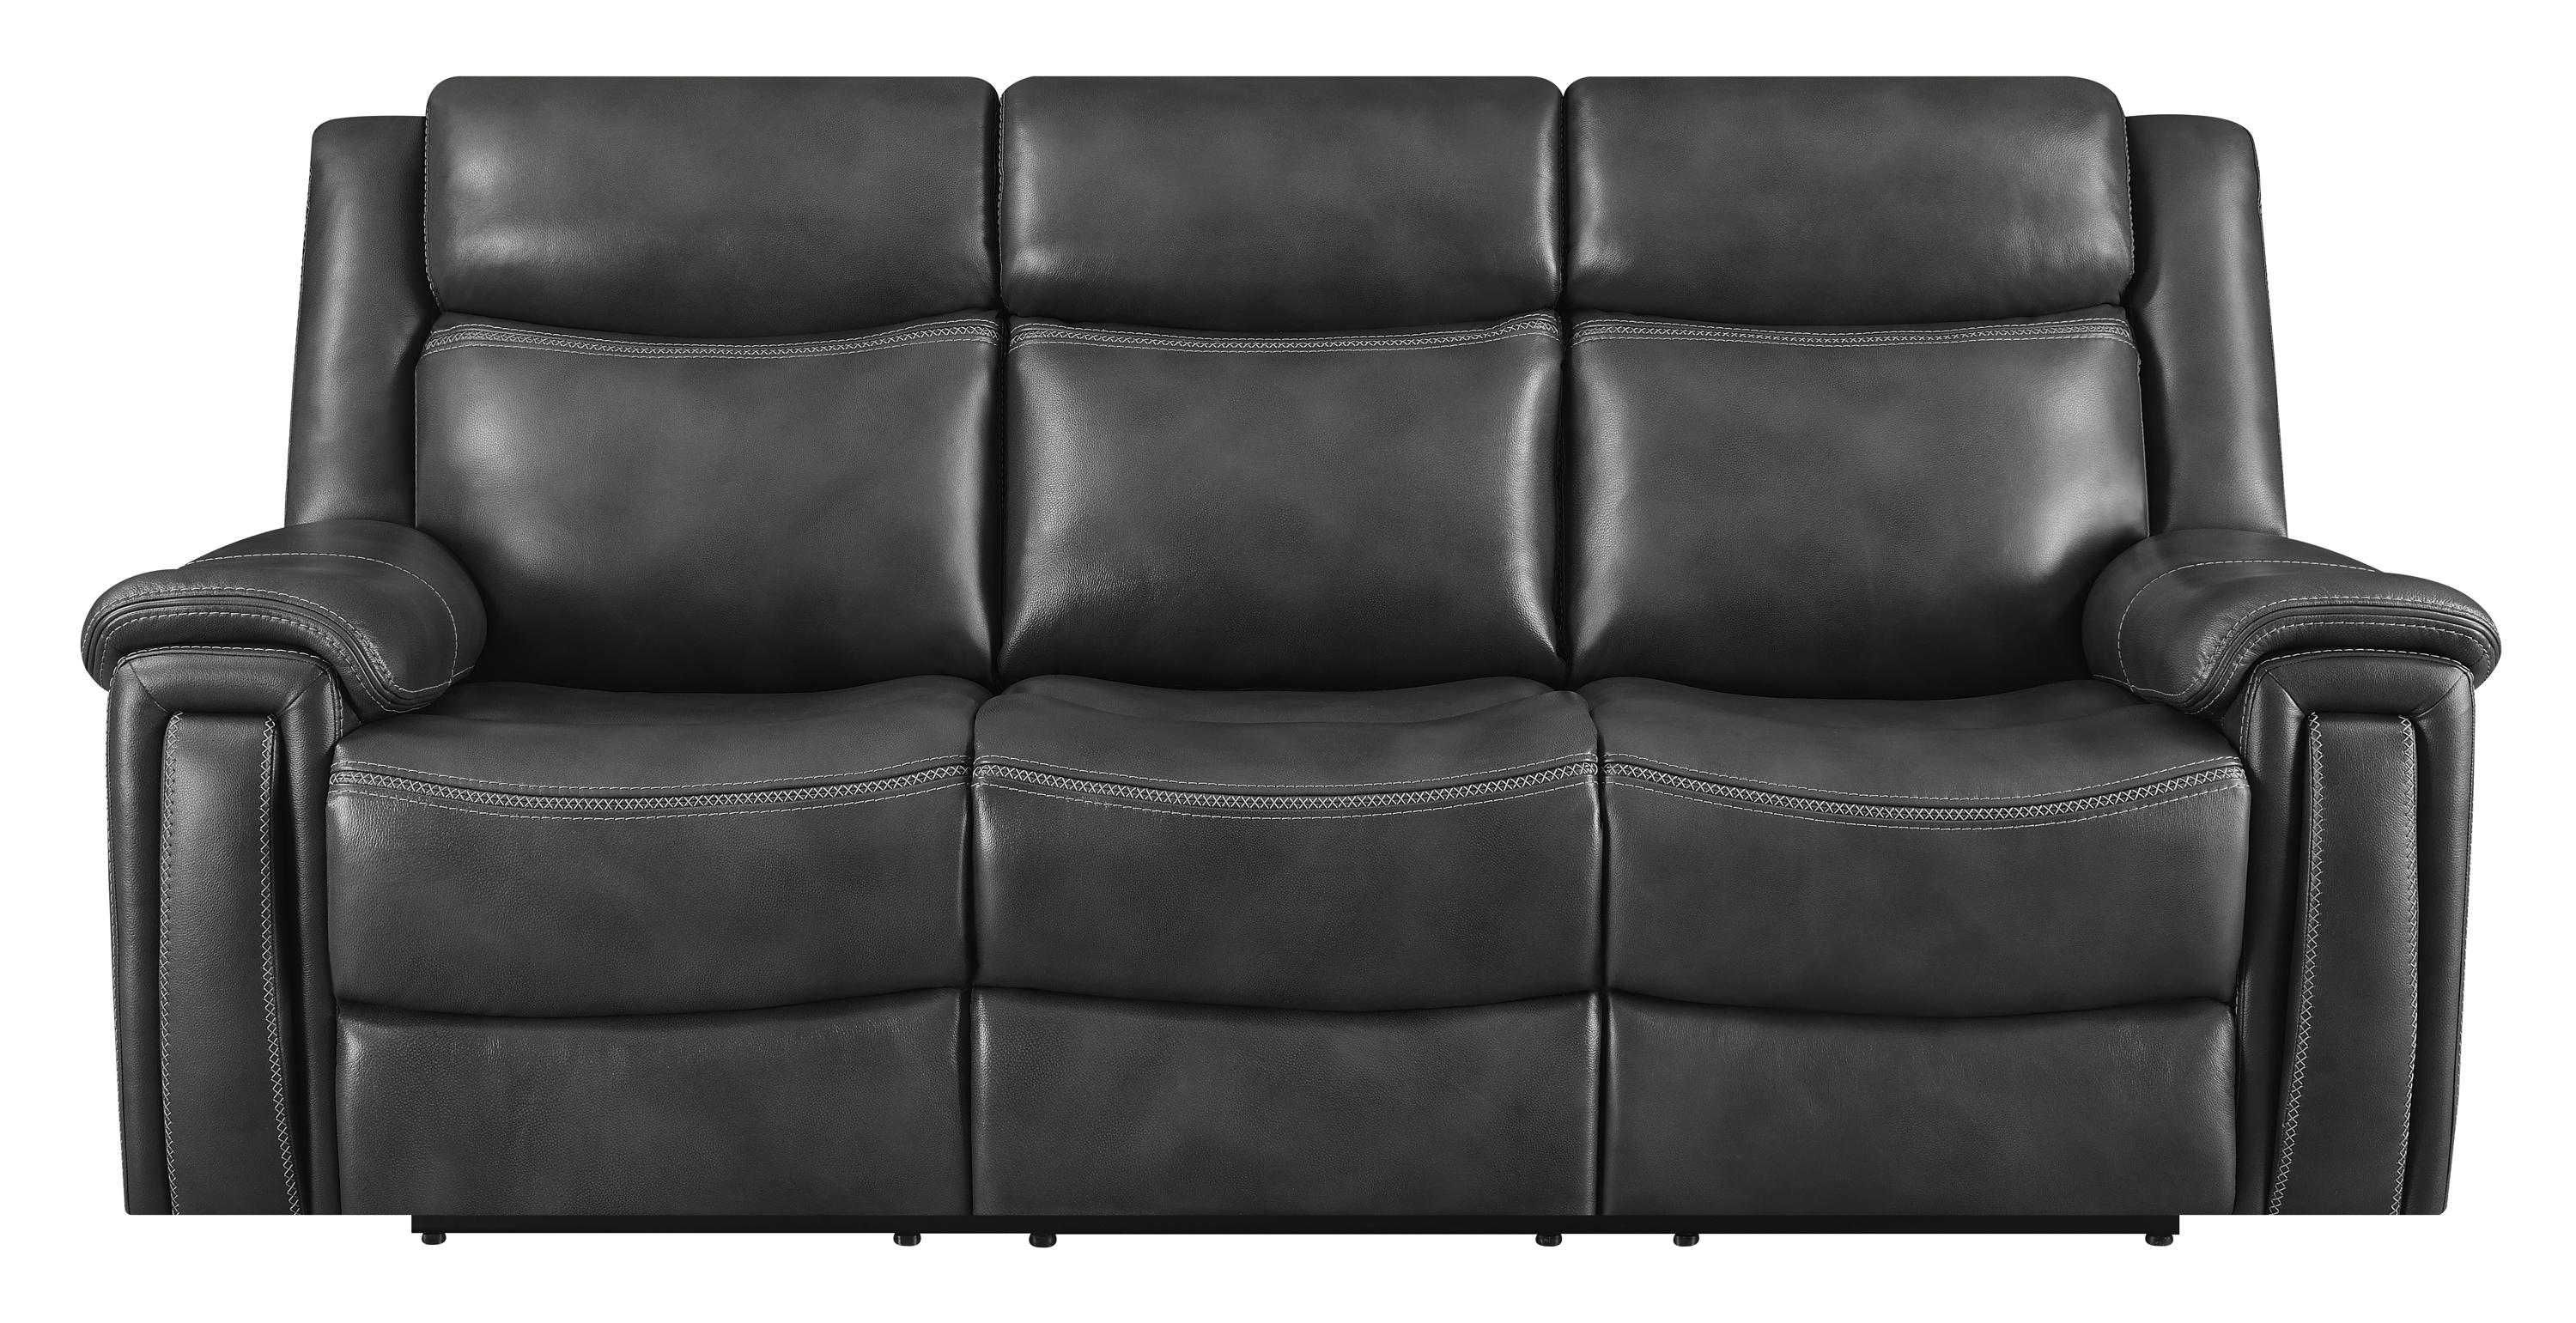 Transitional Power sofa 609321PPI Shallowford 609321PPI in Charcoal Leather